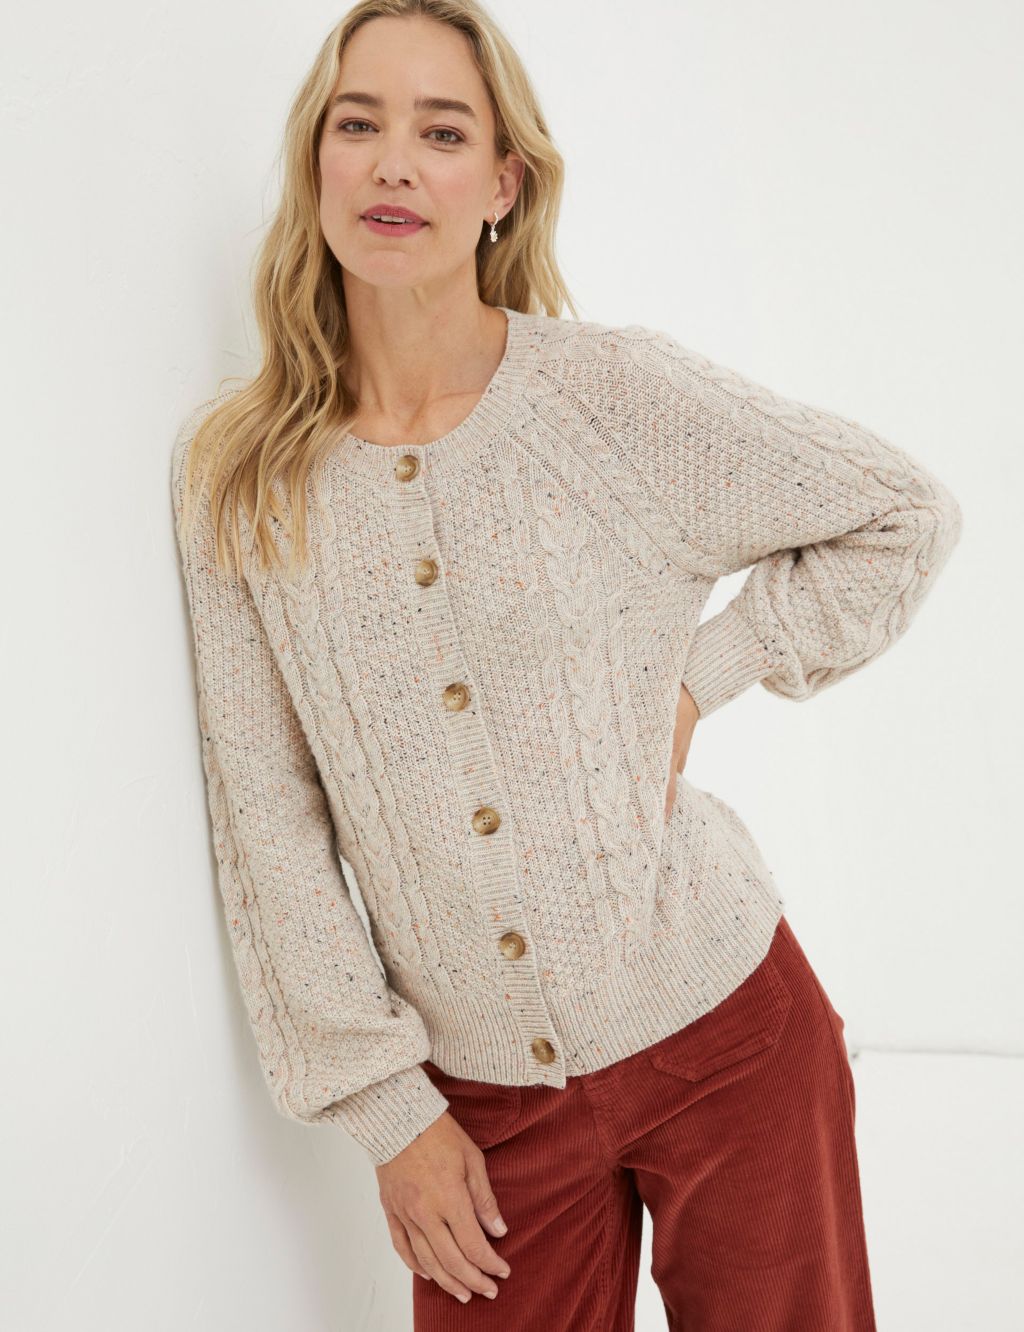 Cable Knit Crew Neck Cardigan with Wool image 1